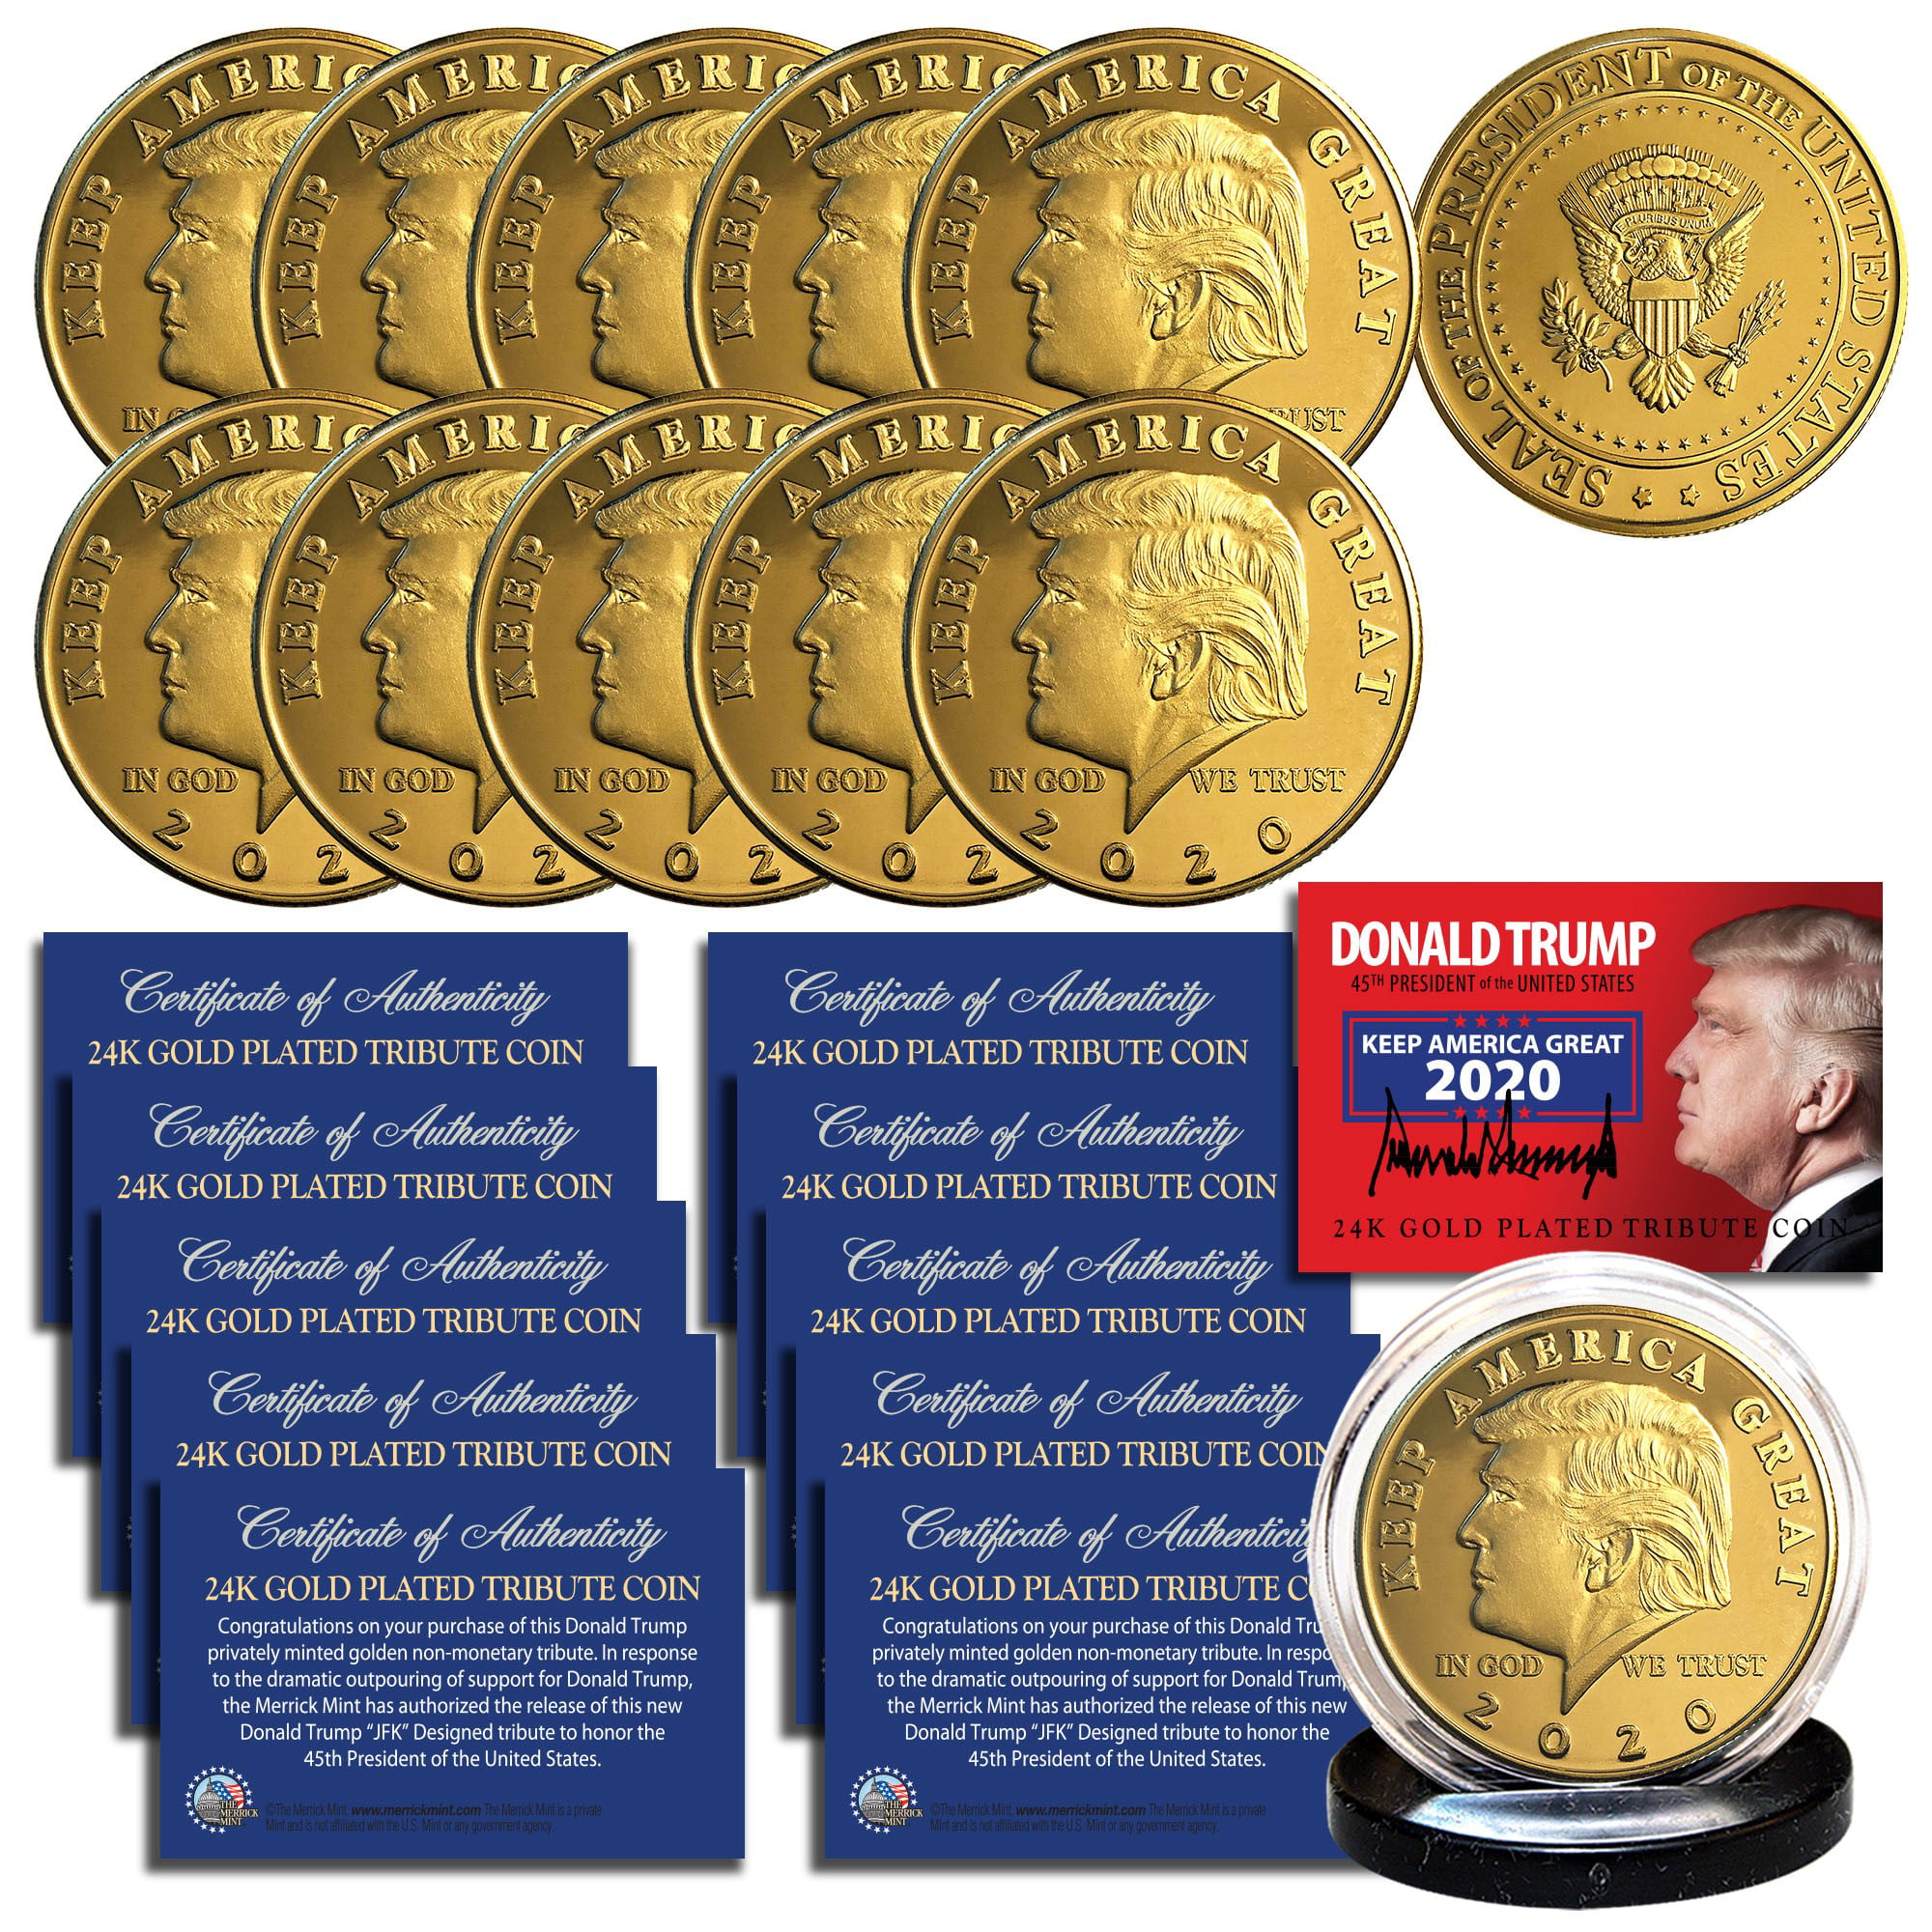 Trump 2020 Keep America Great Coin Gold Color Historical Collectible Coin 